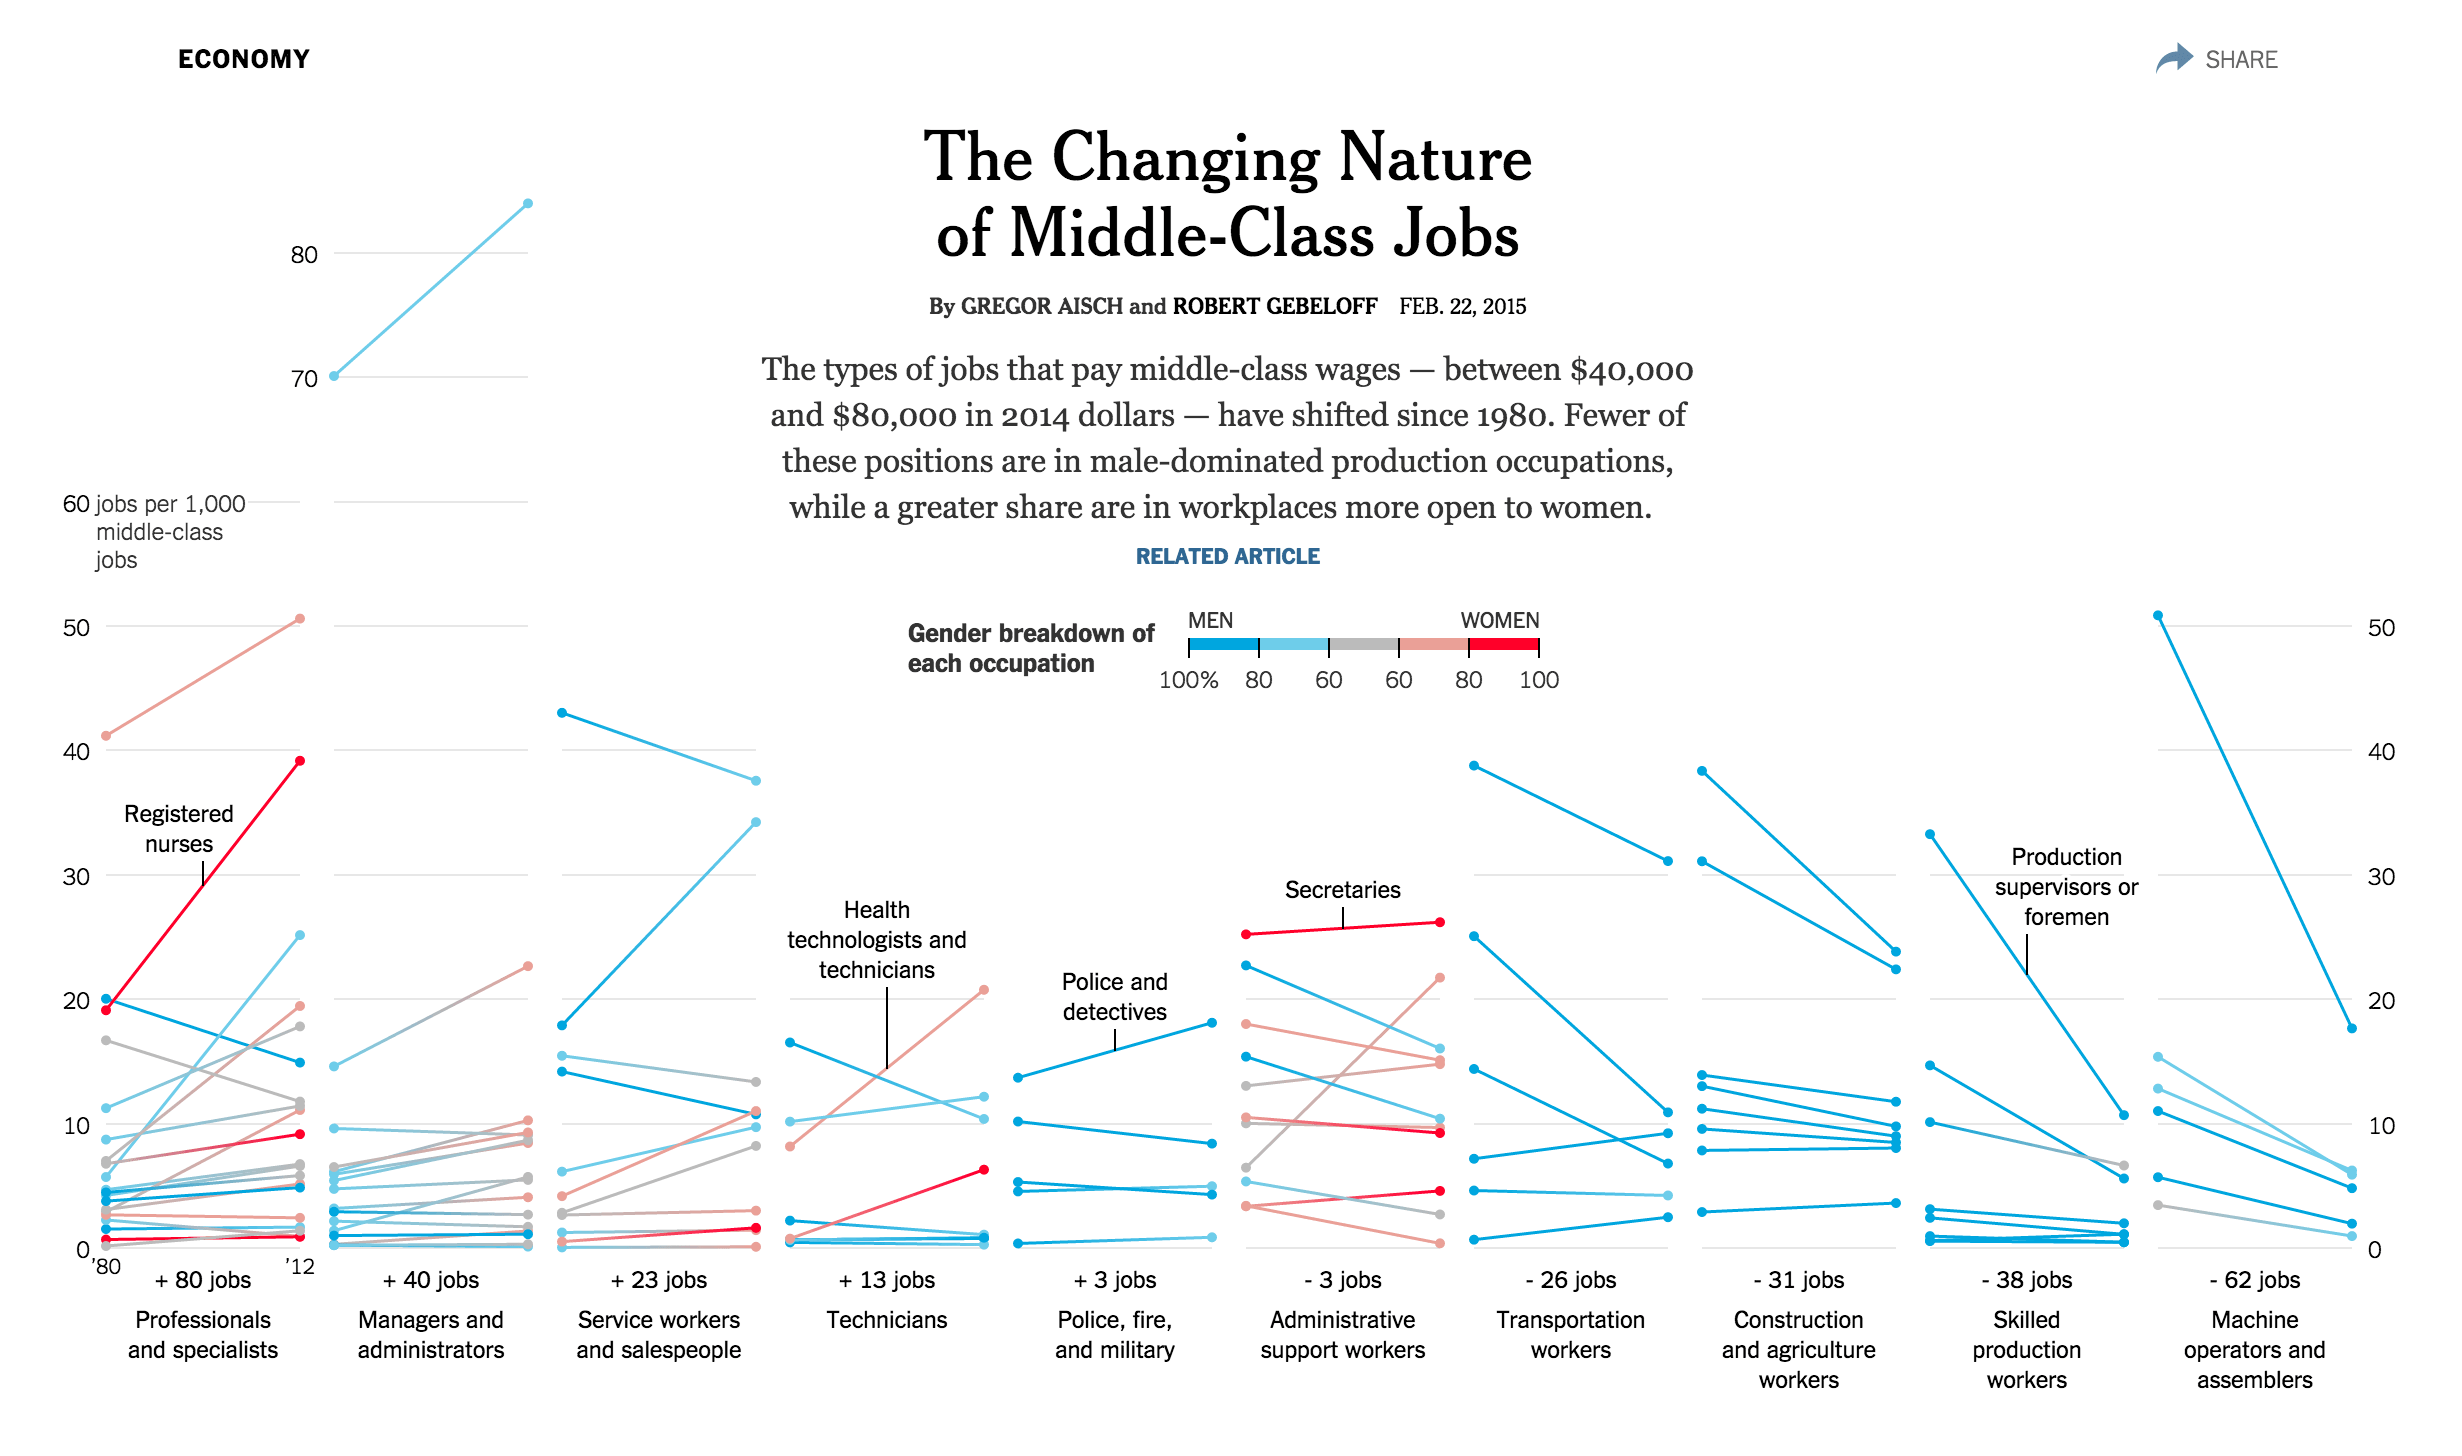 The Changing Nature of Middle-Class Jobs